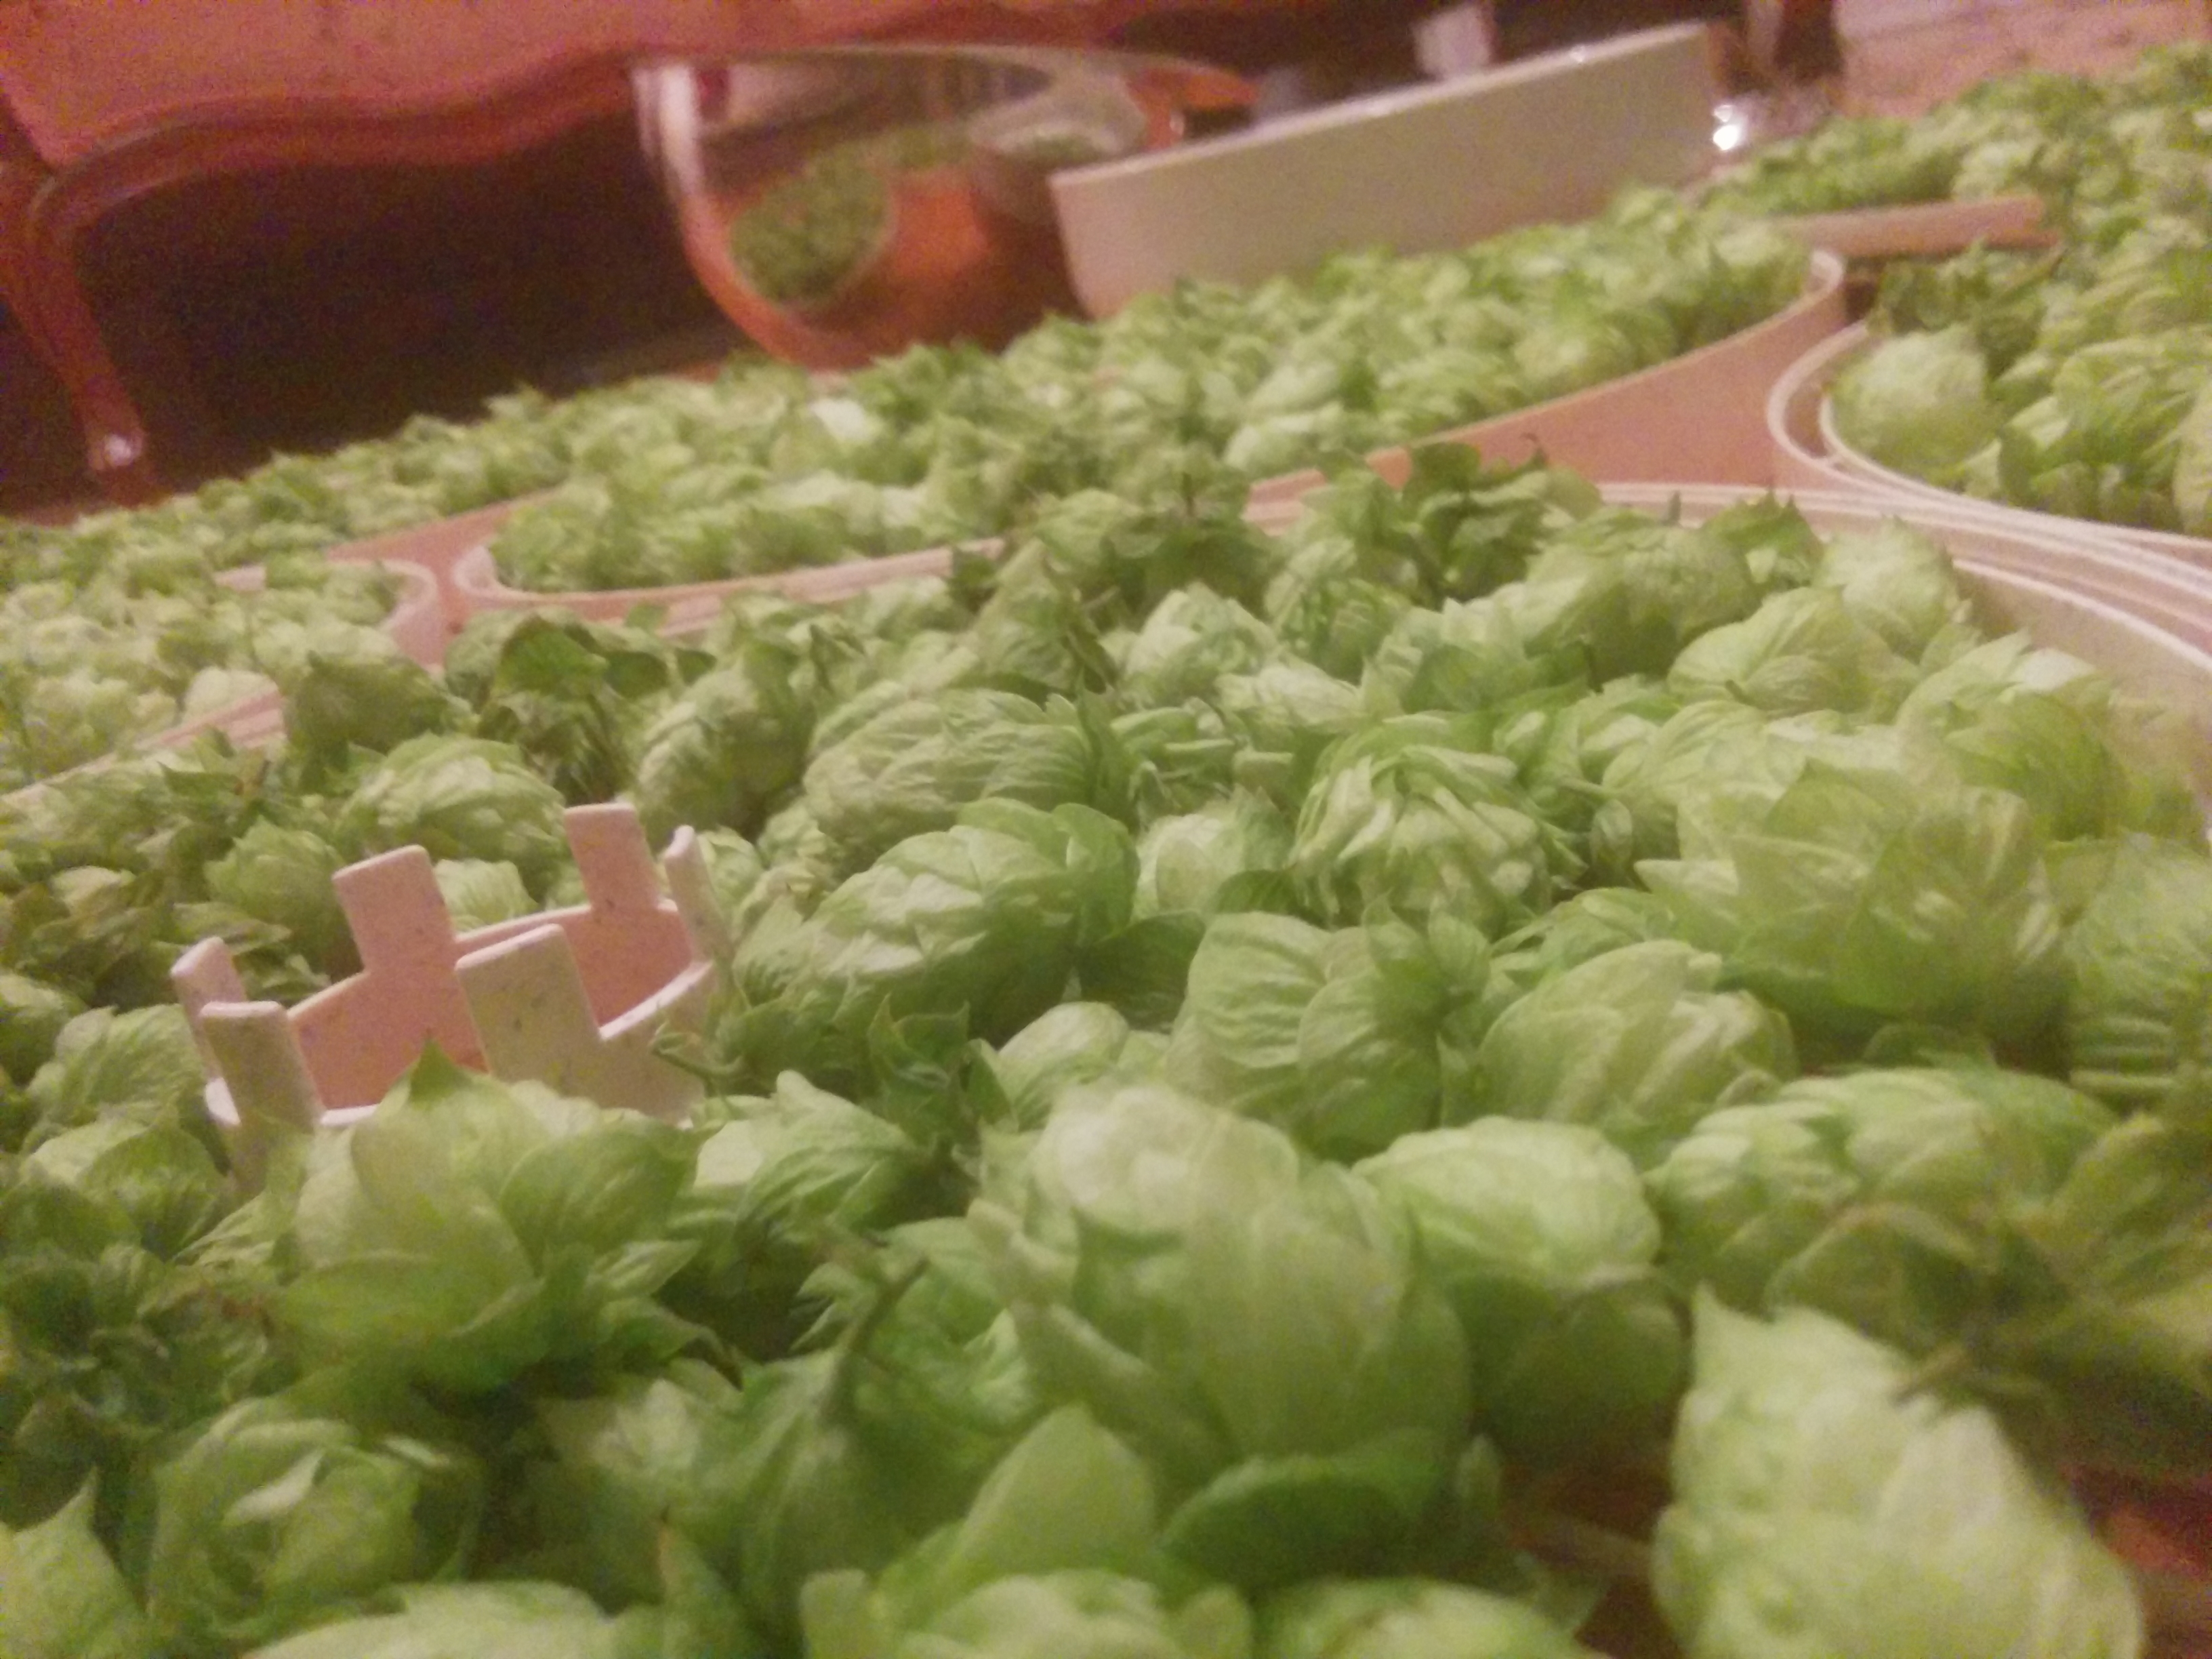 Hop cones layed out for drying